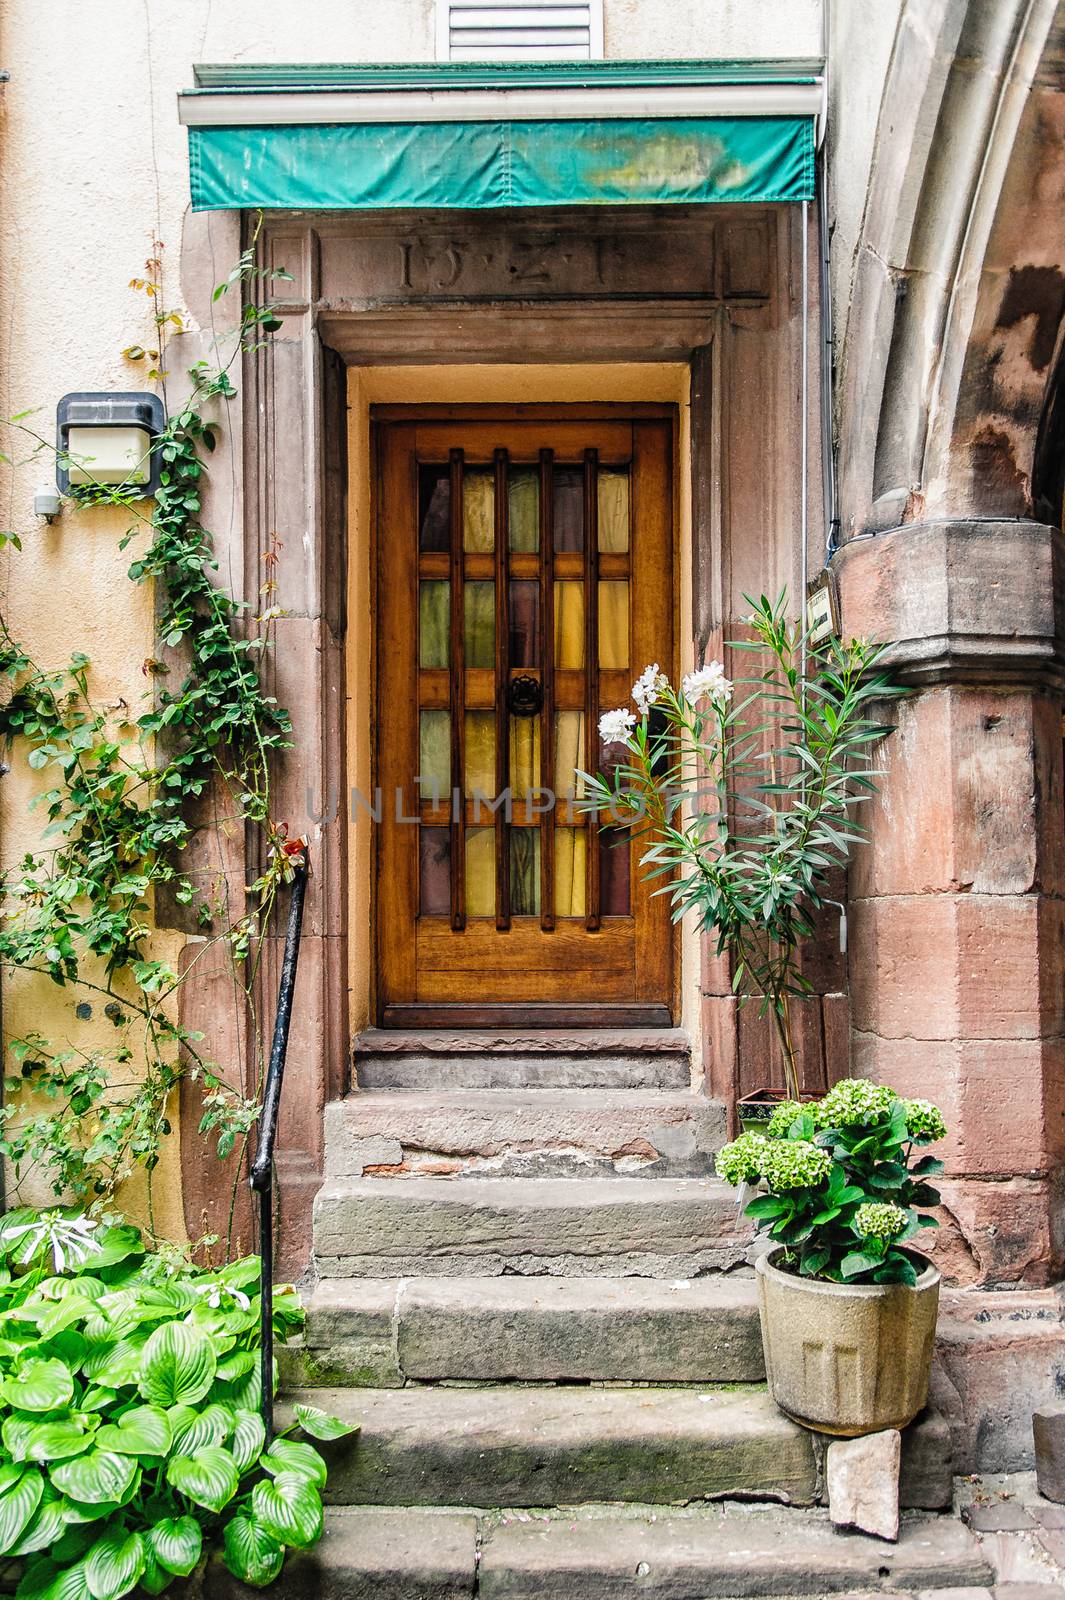 Doorway of a Beautiful Old House in Alsace, France